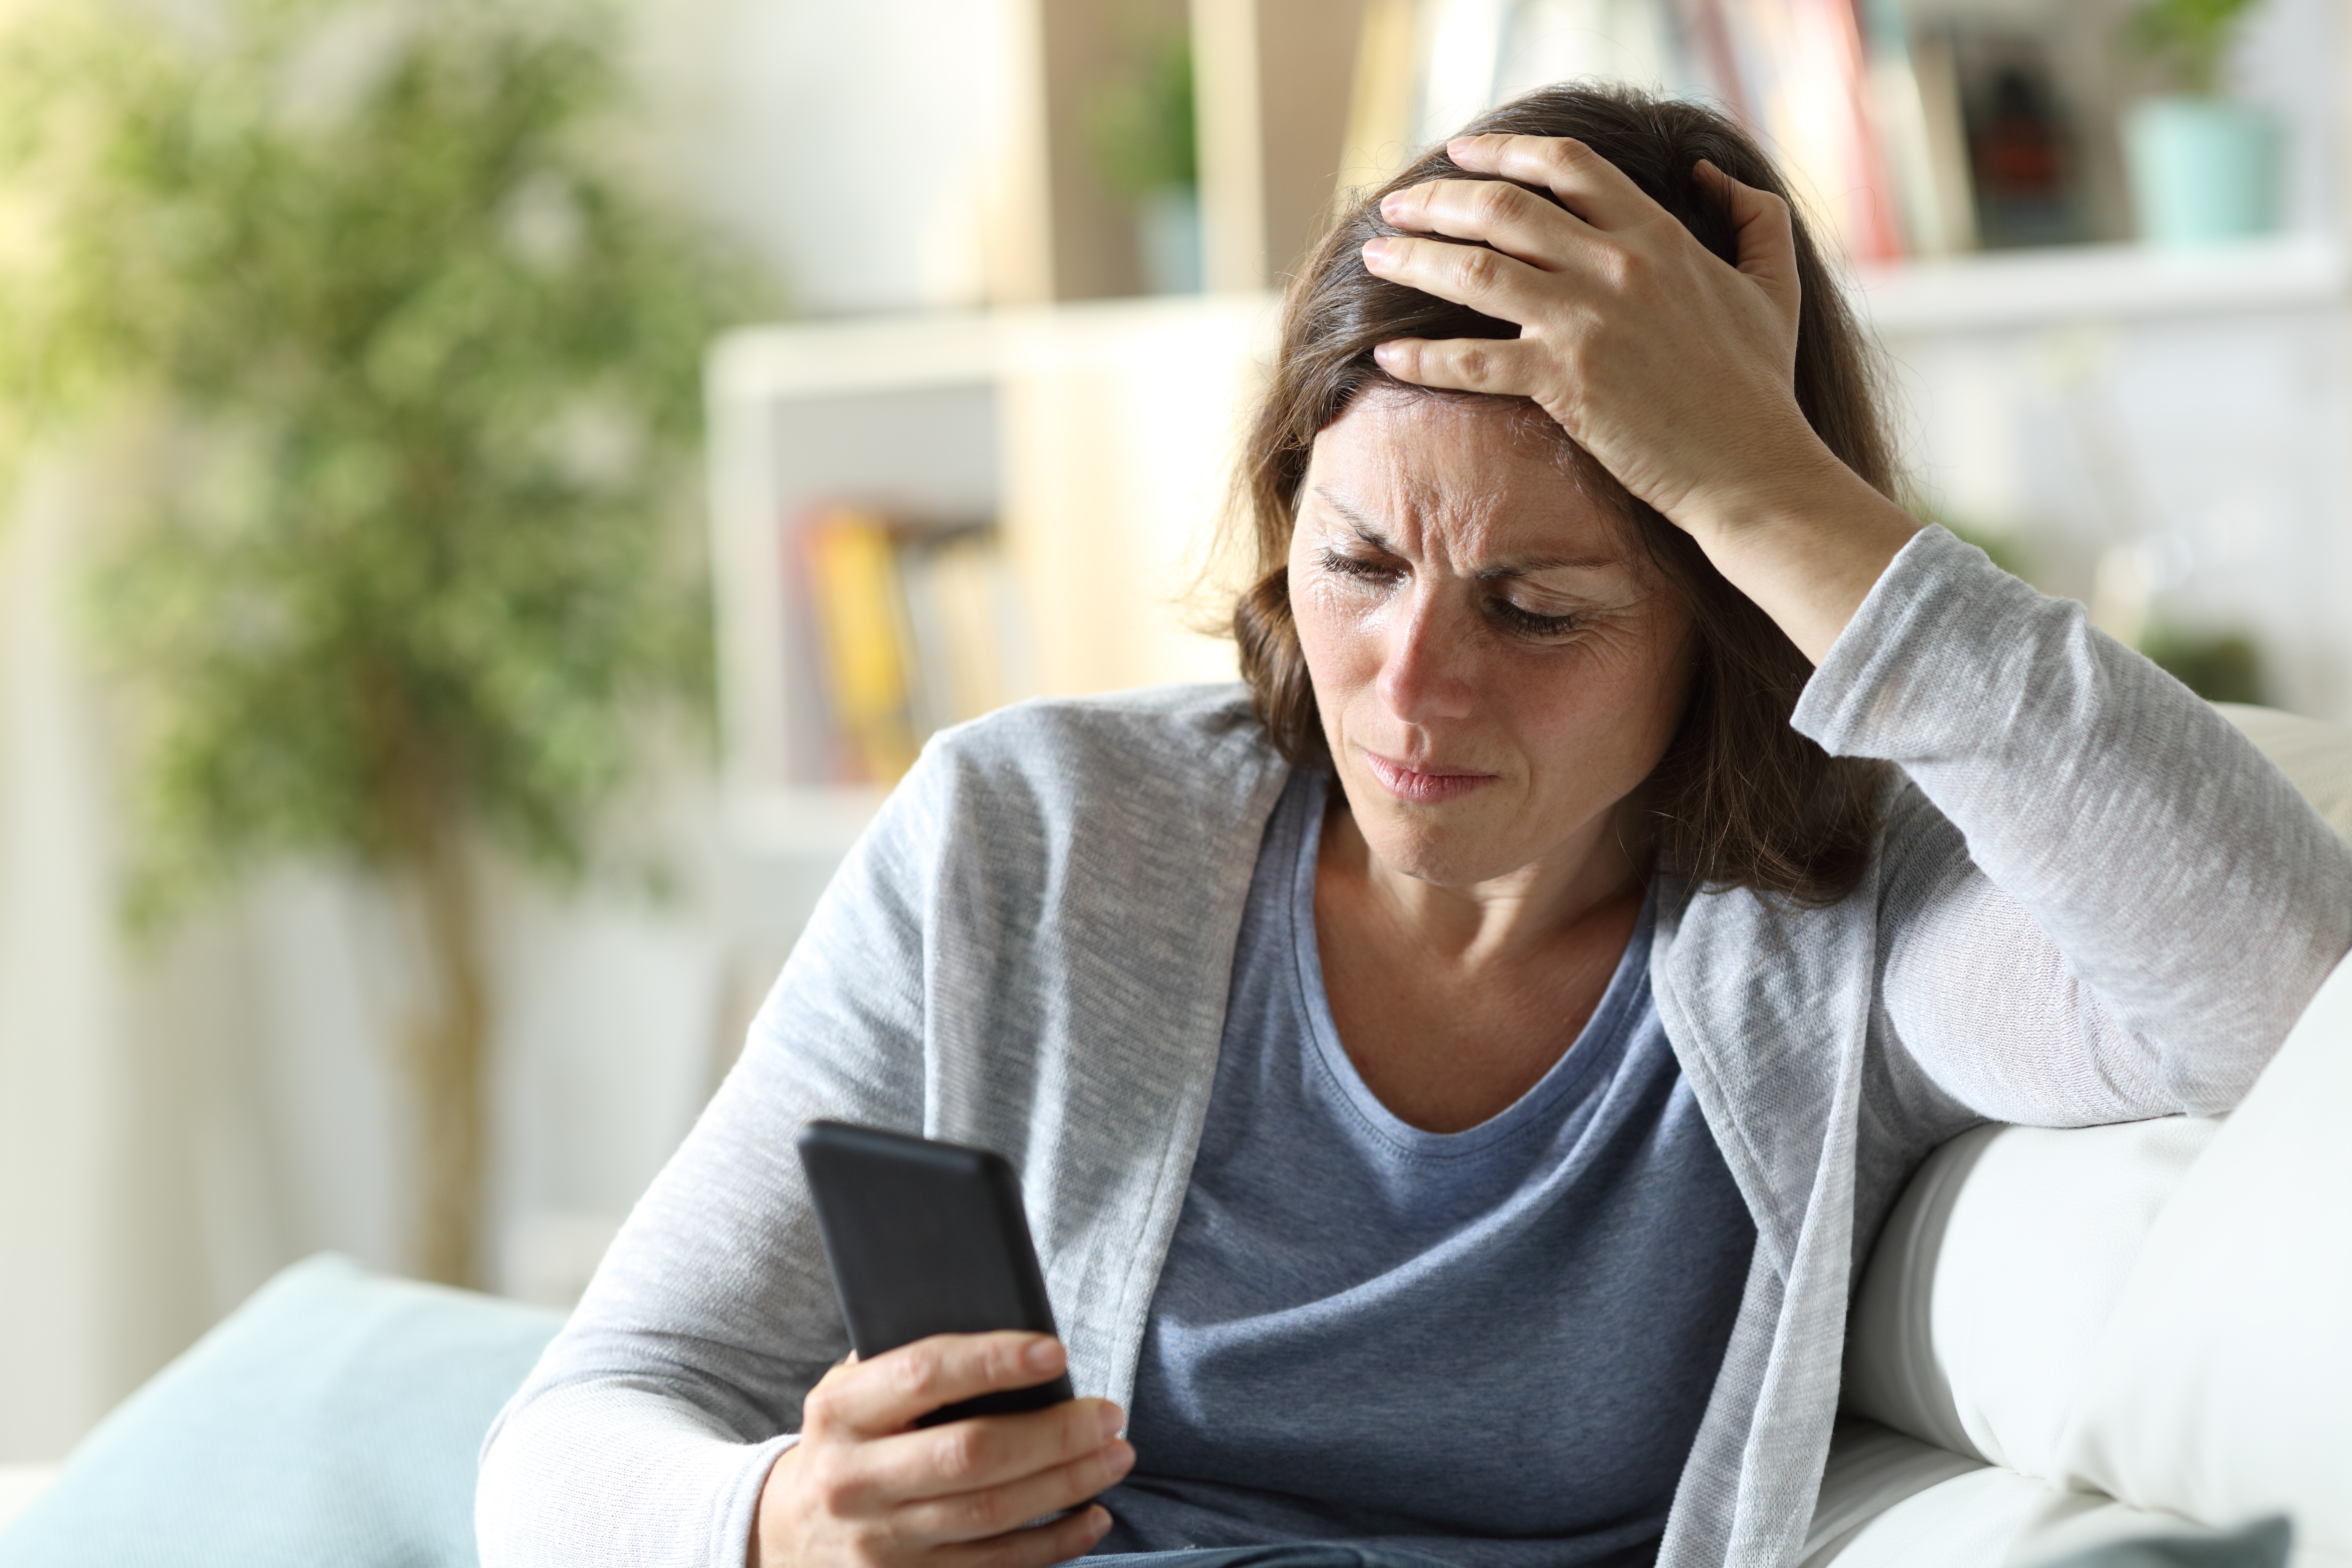 A woman looking confused and sad as she looks at her phone | Source: Shutterstock